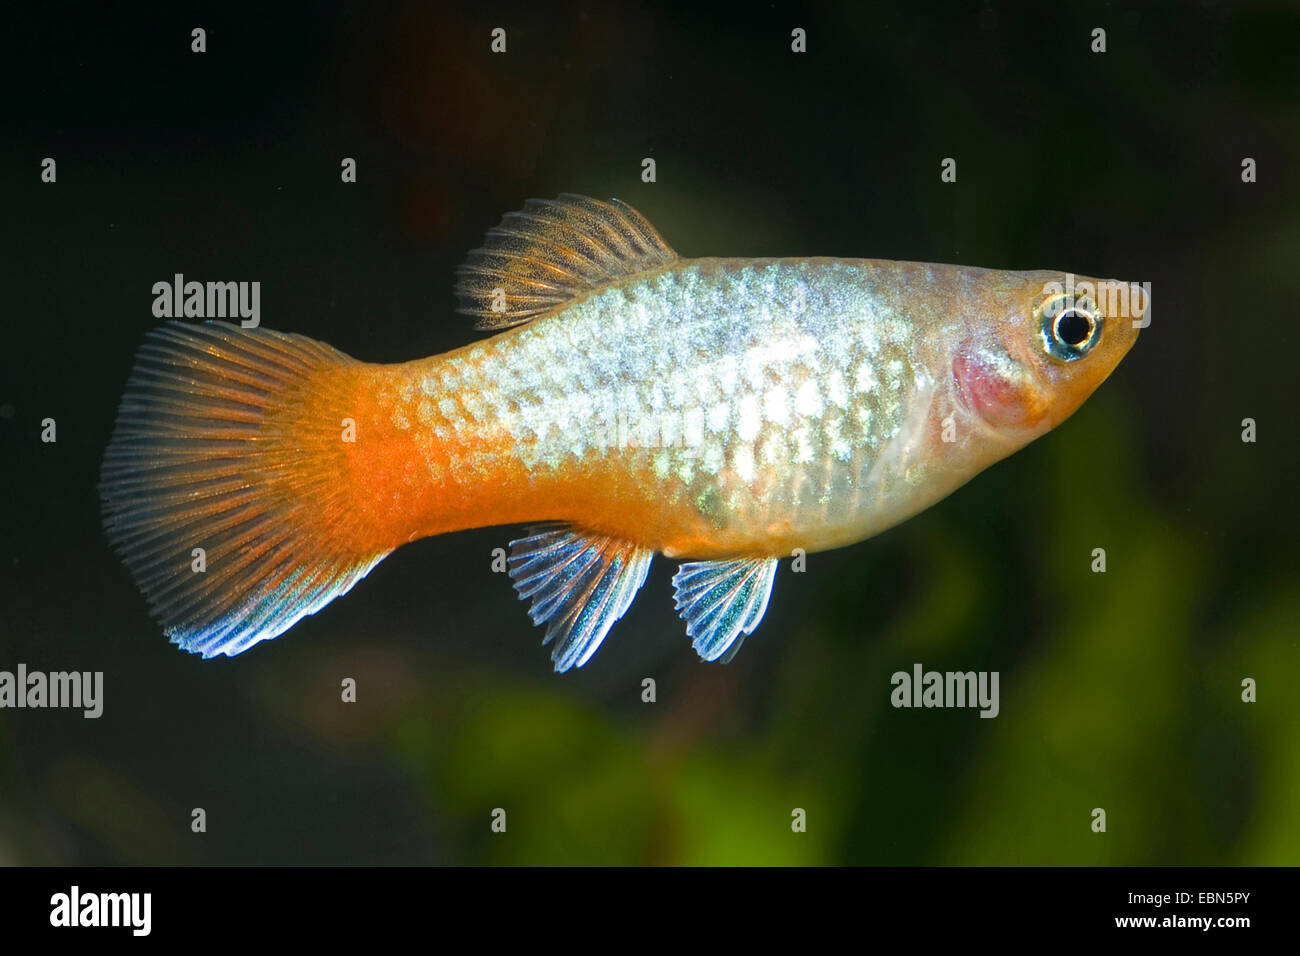 southern platyfish, Maculate Platy (Xiphophorus maculatus), breed Blue Red-tail Platy Stock Photo